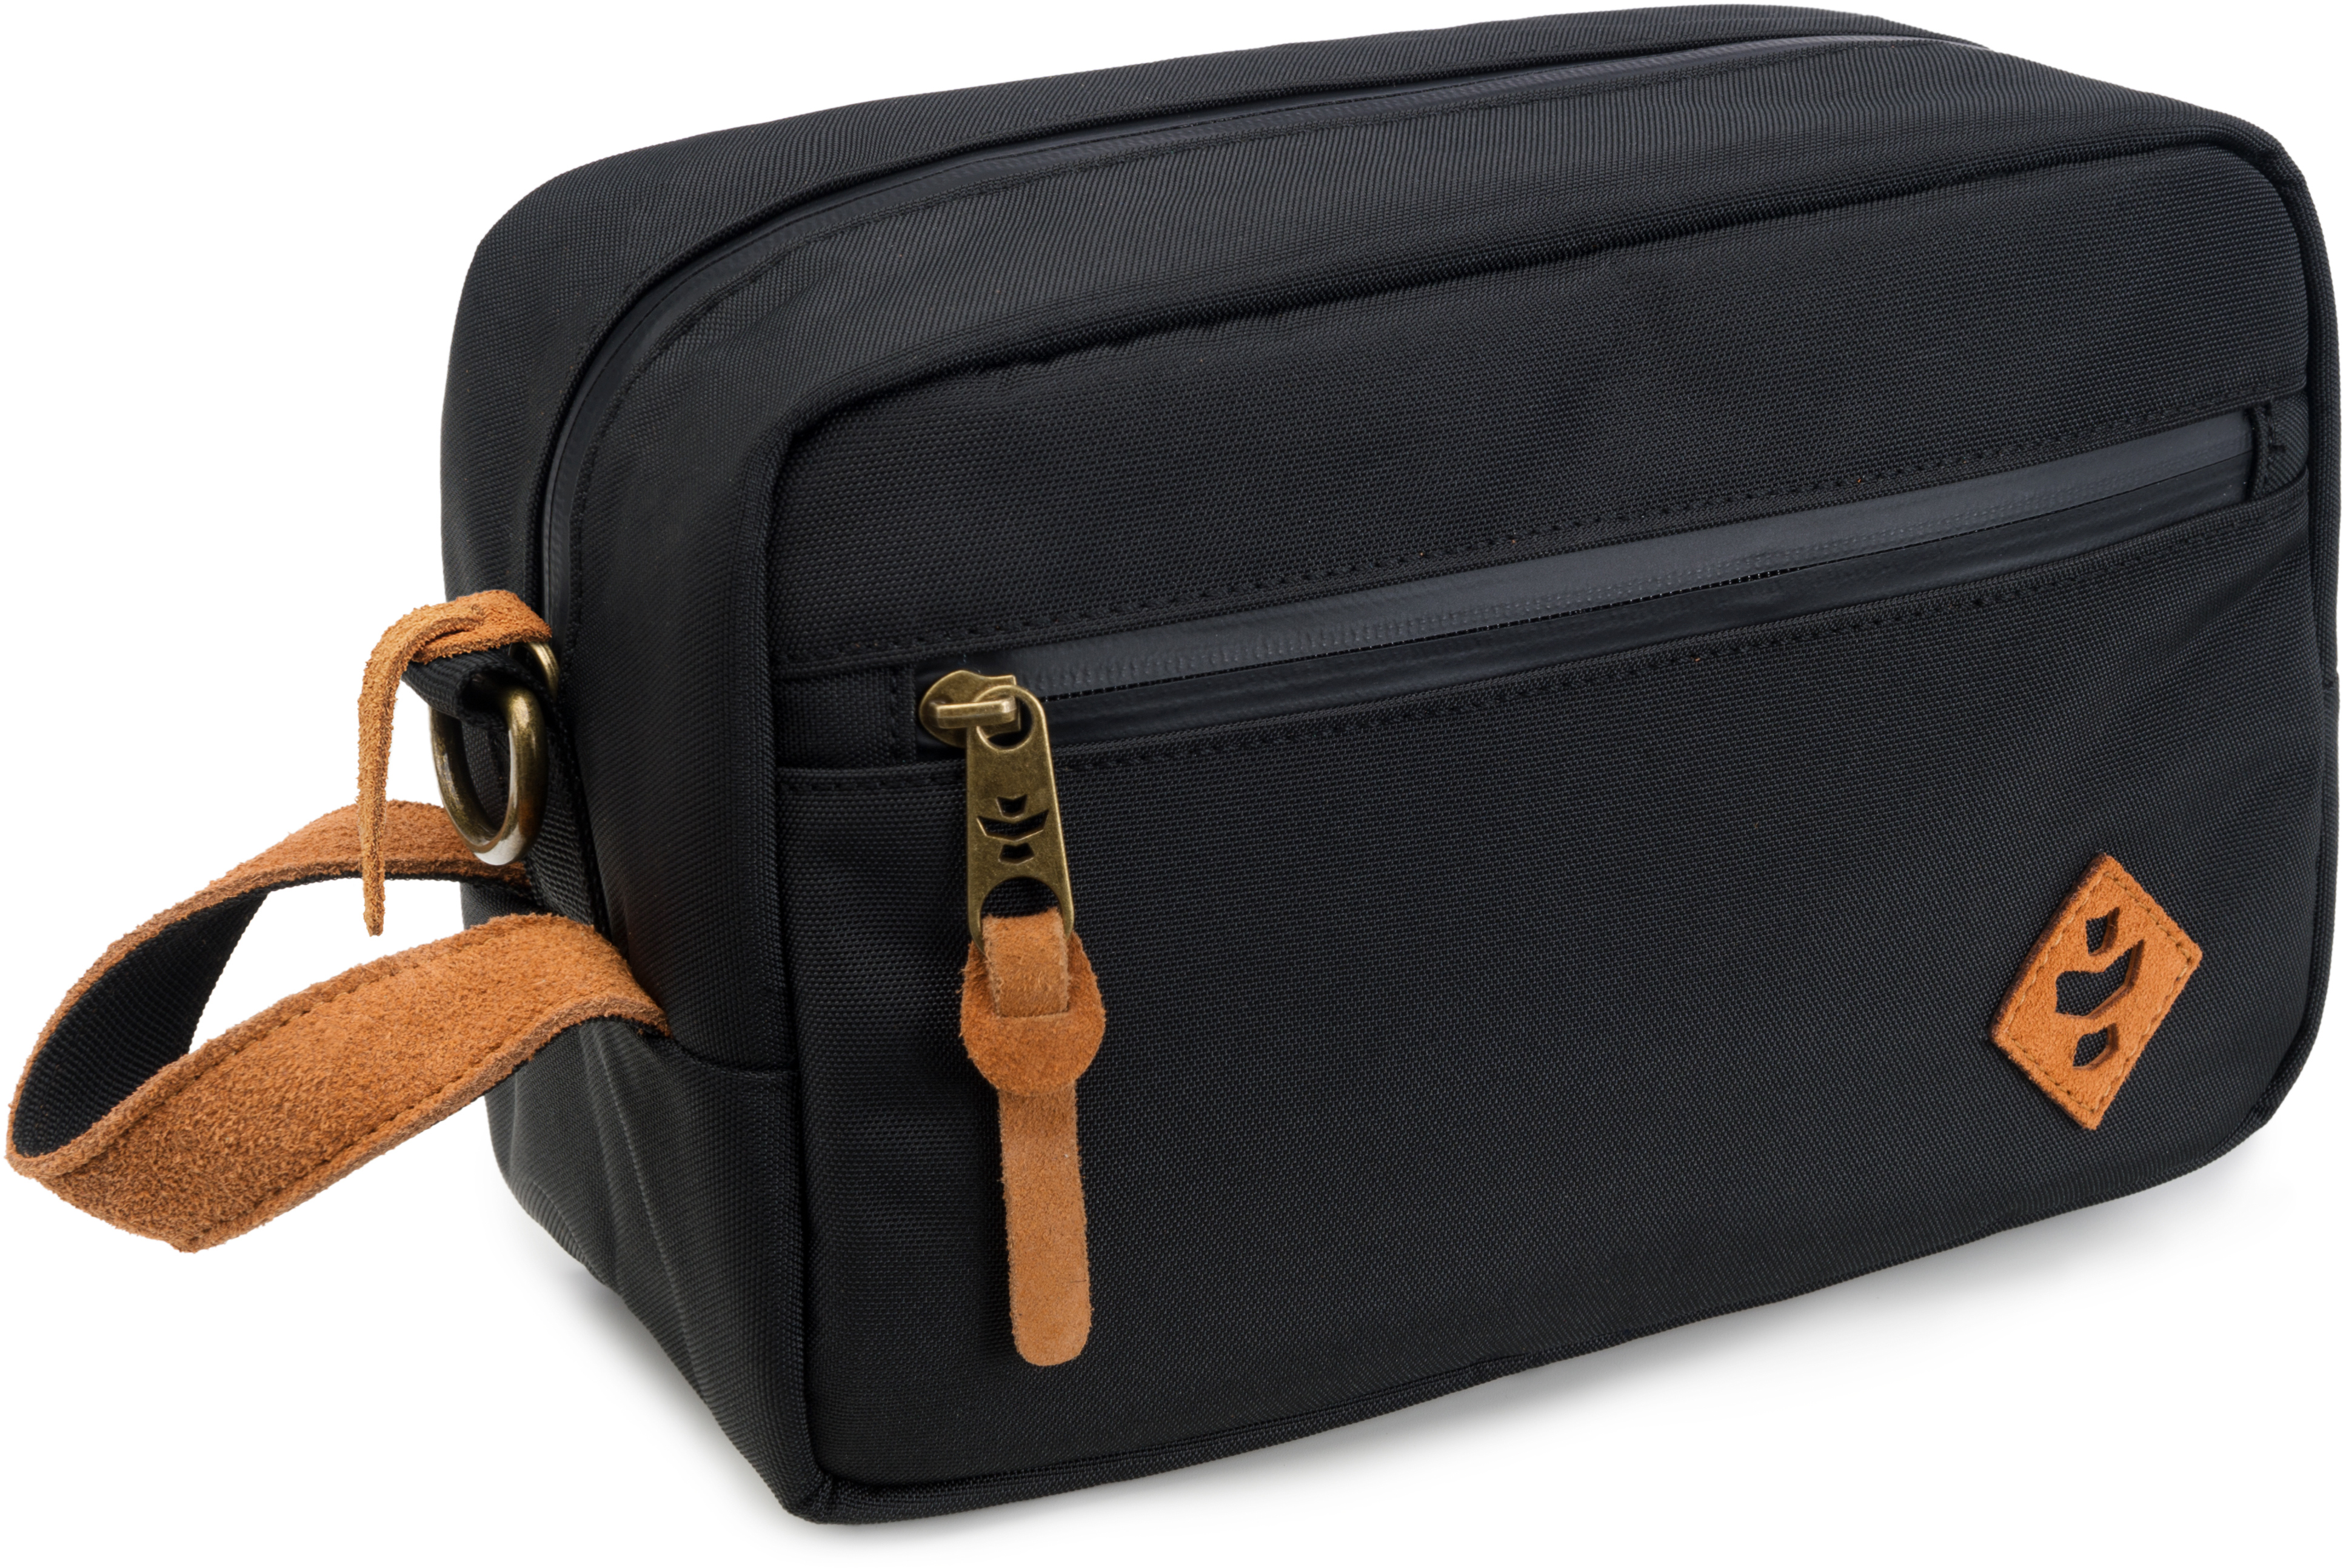 Picture for Revelry Supply The Stowaway Toiletry Kit, Black